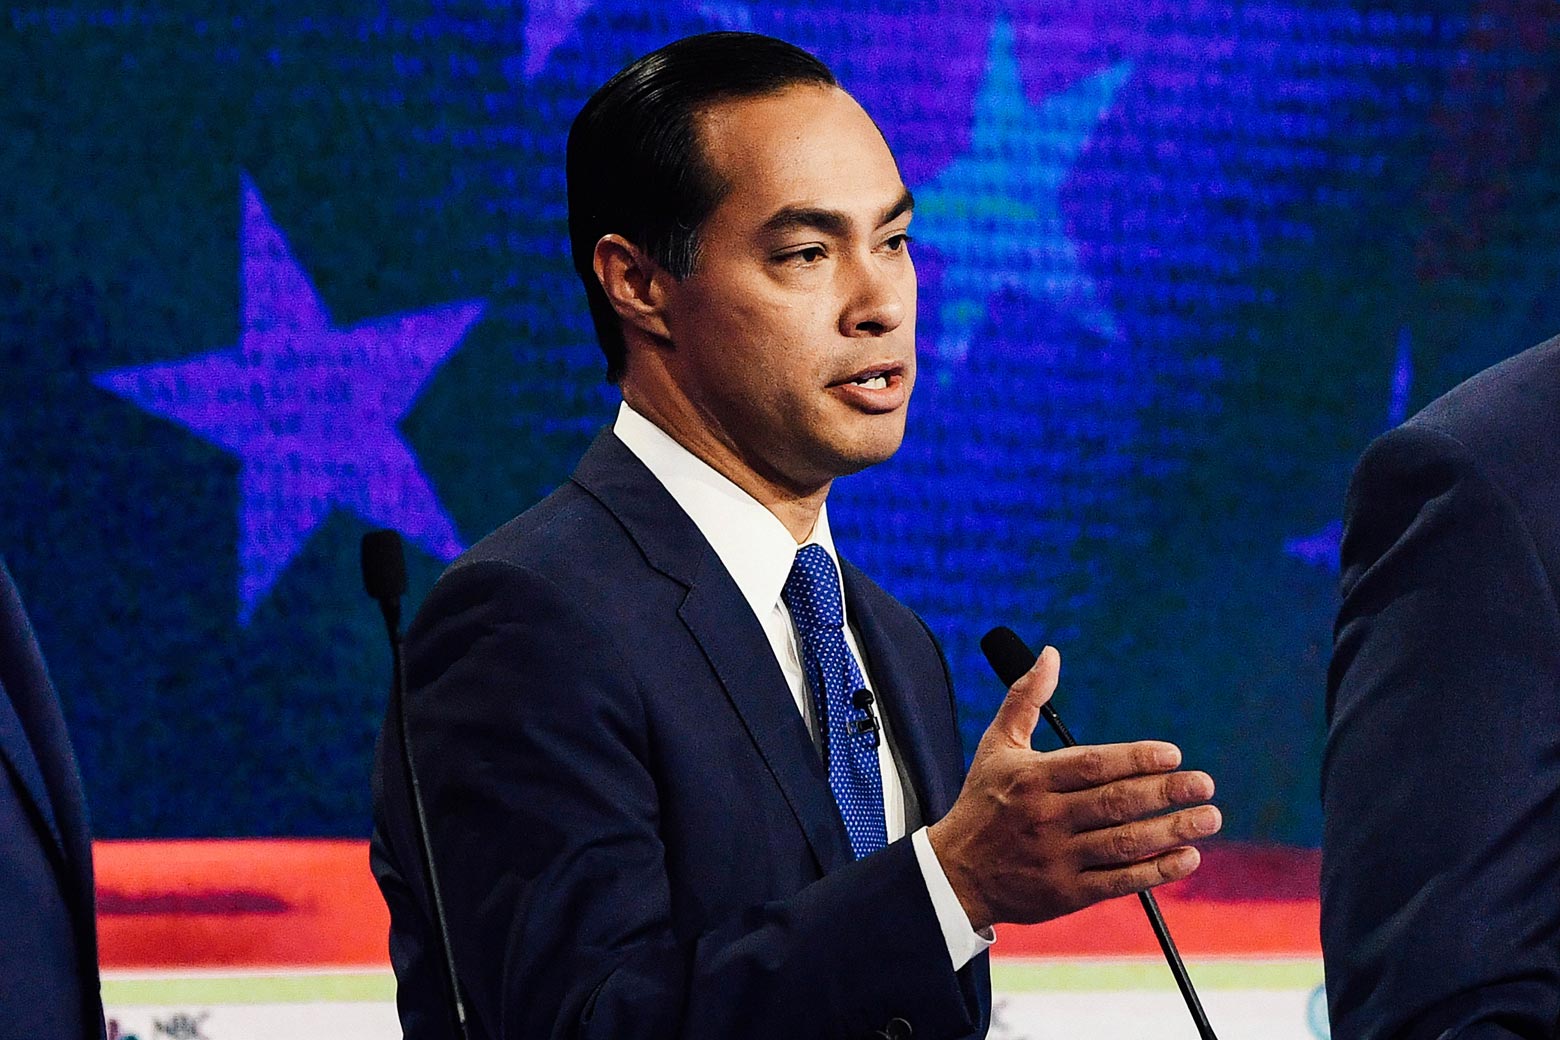 Julián Castro gestures from behind his podium on the debate stage.